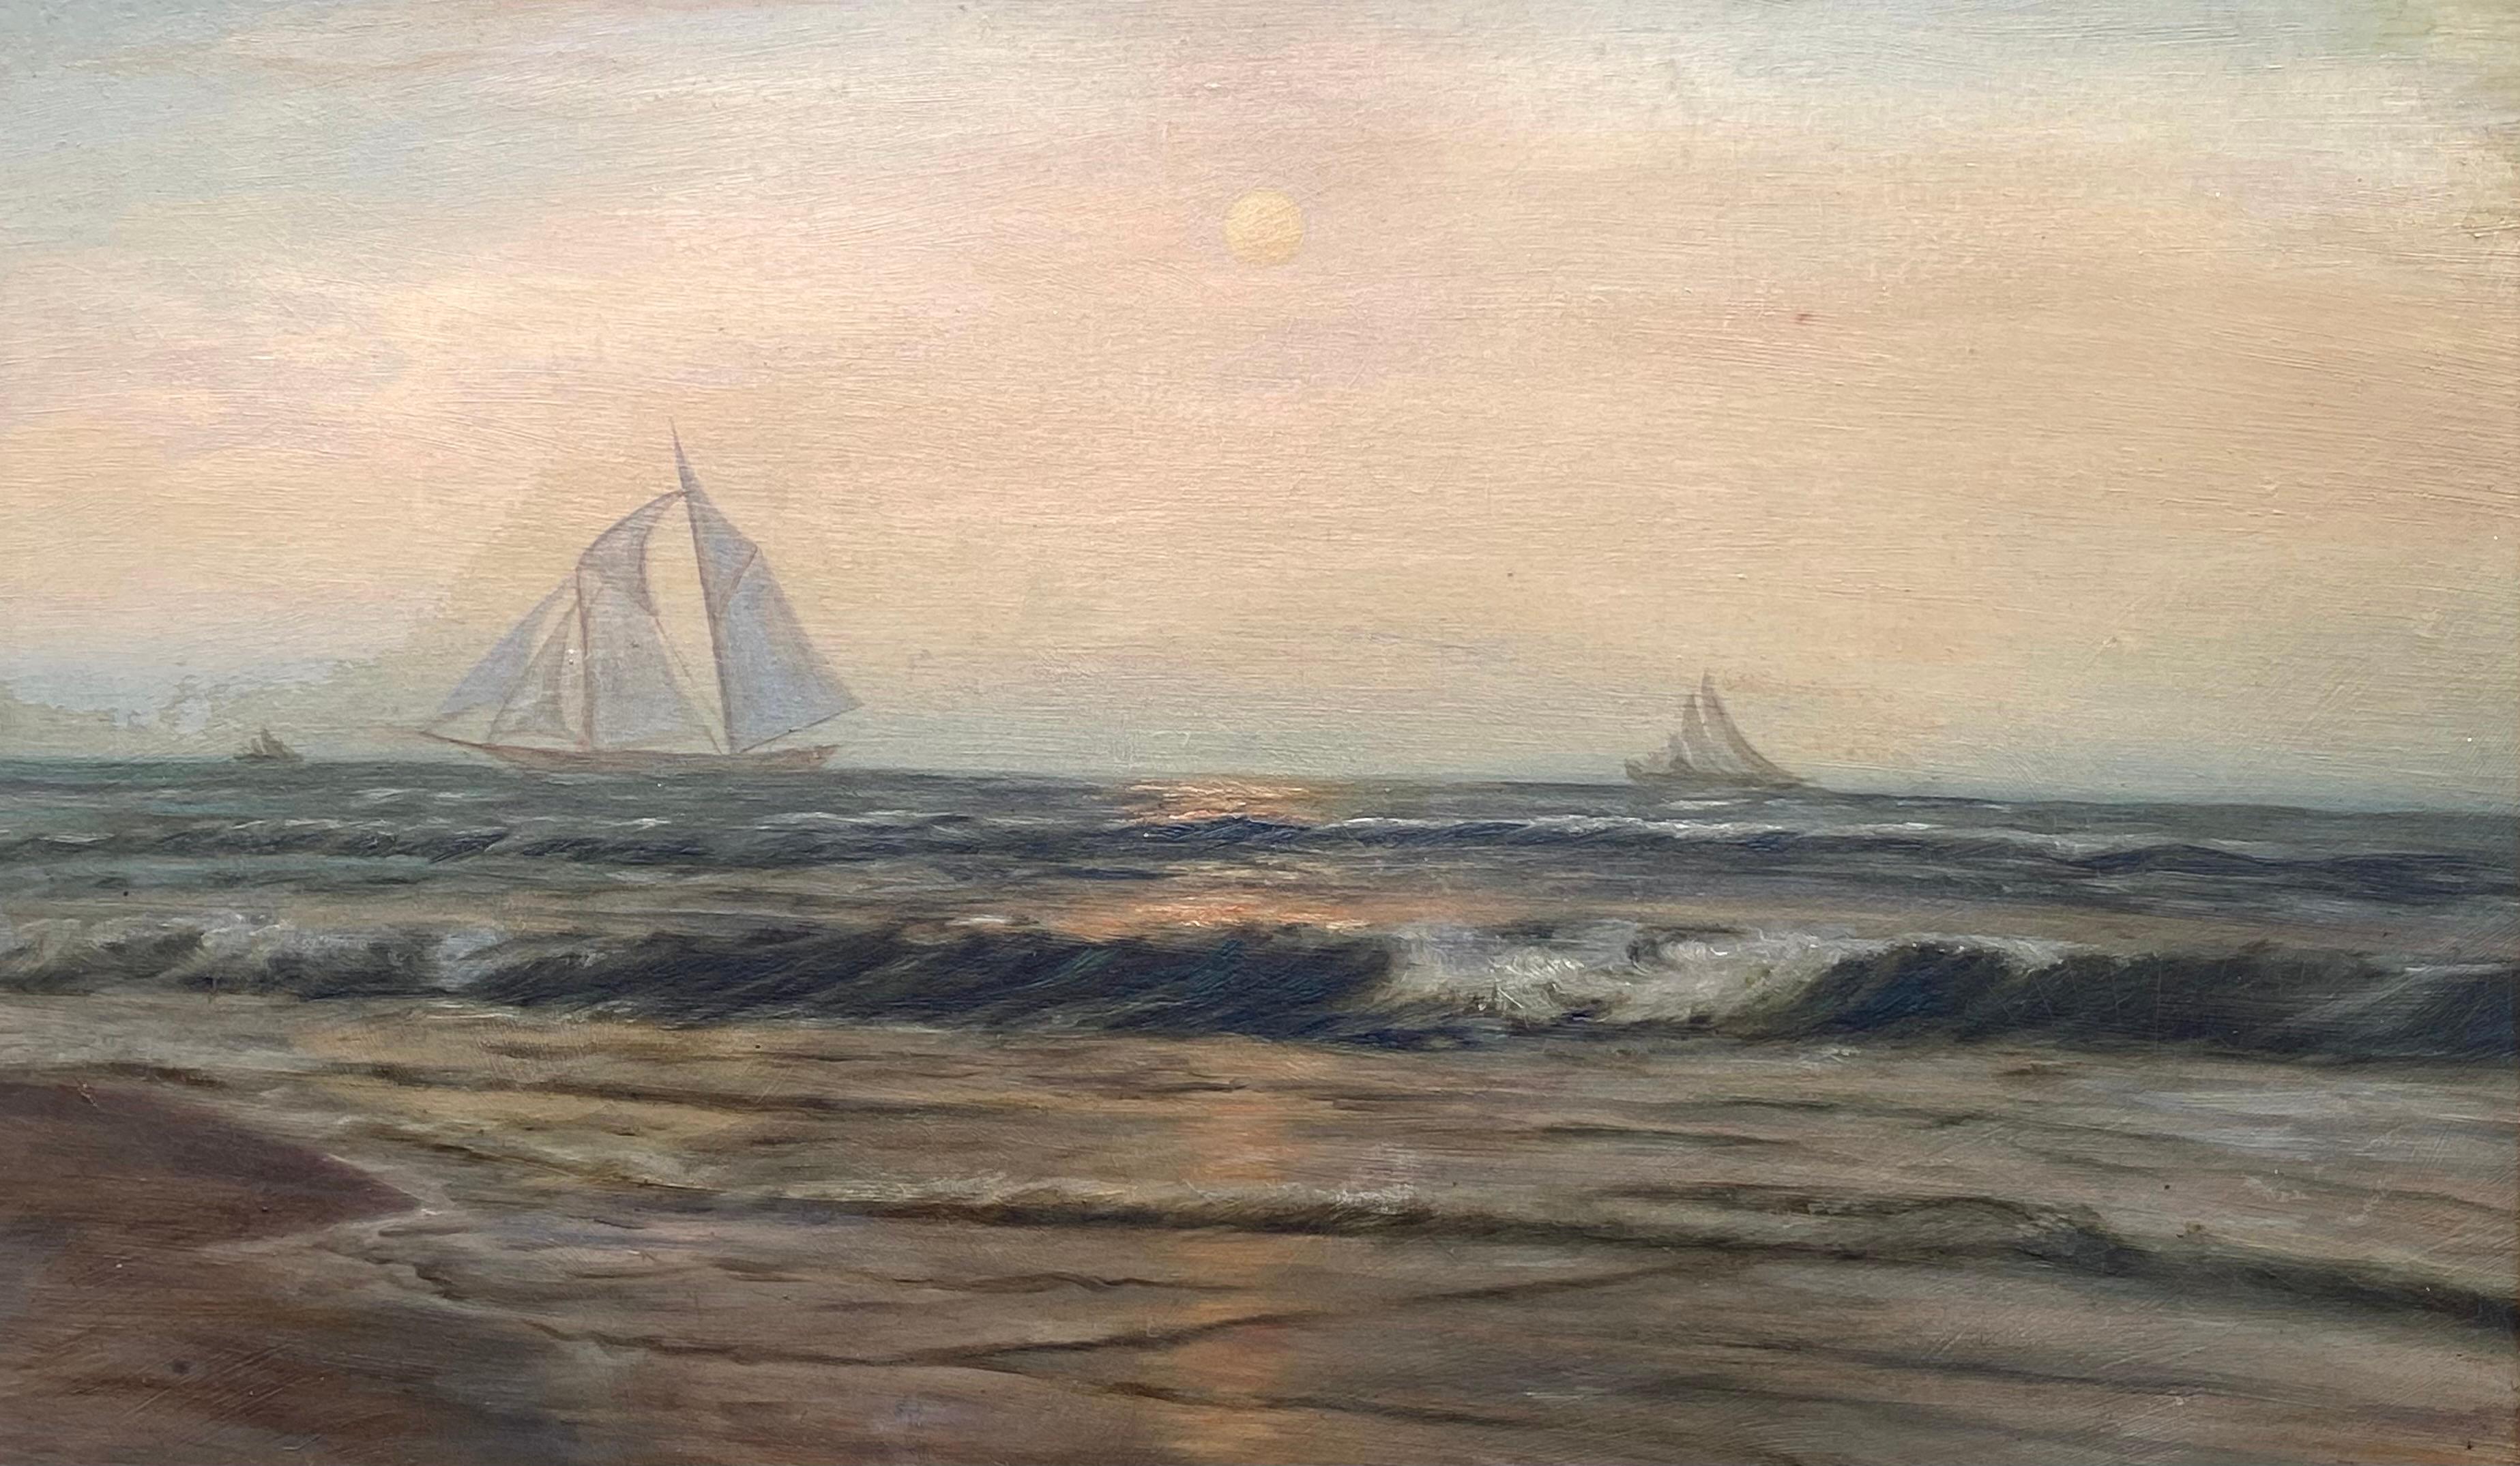 “Sailboats off the Coast” - Academic Painting by Franklin D. Briscoe